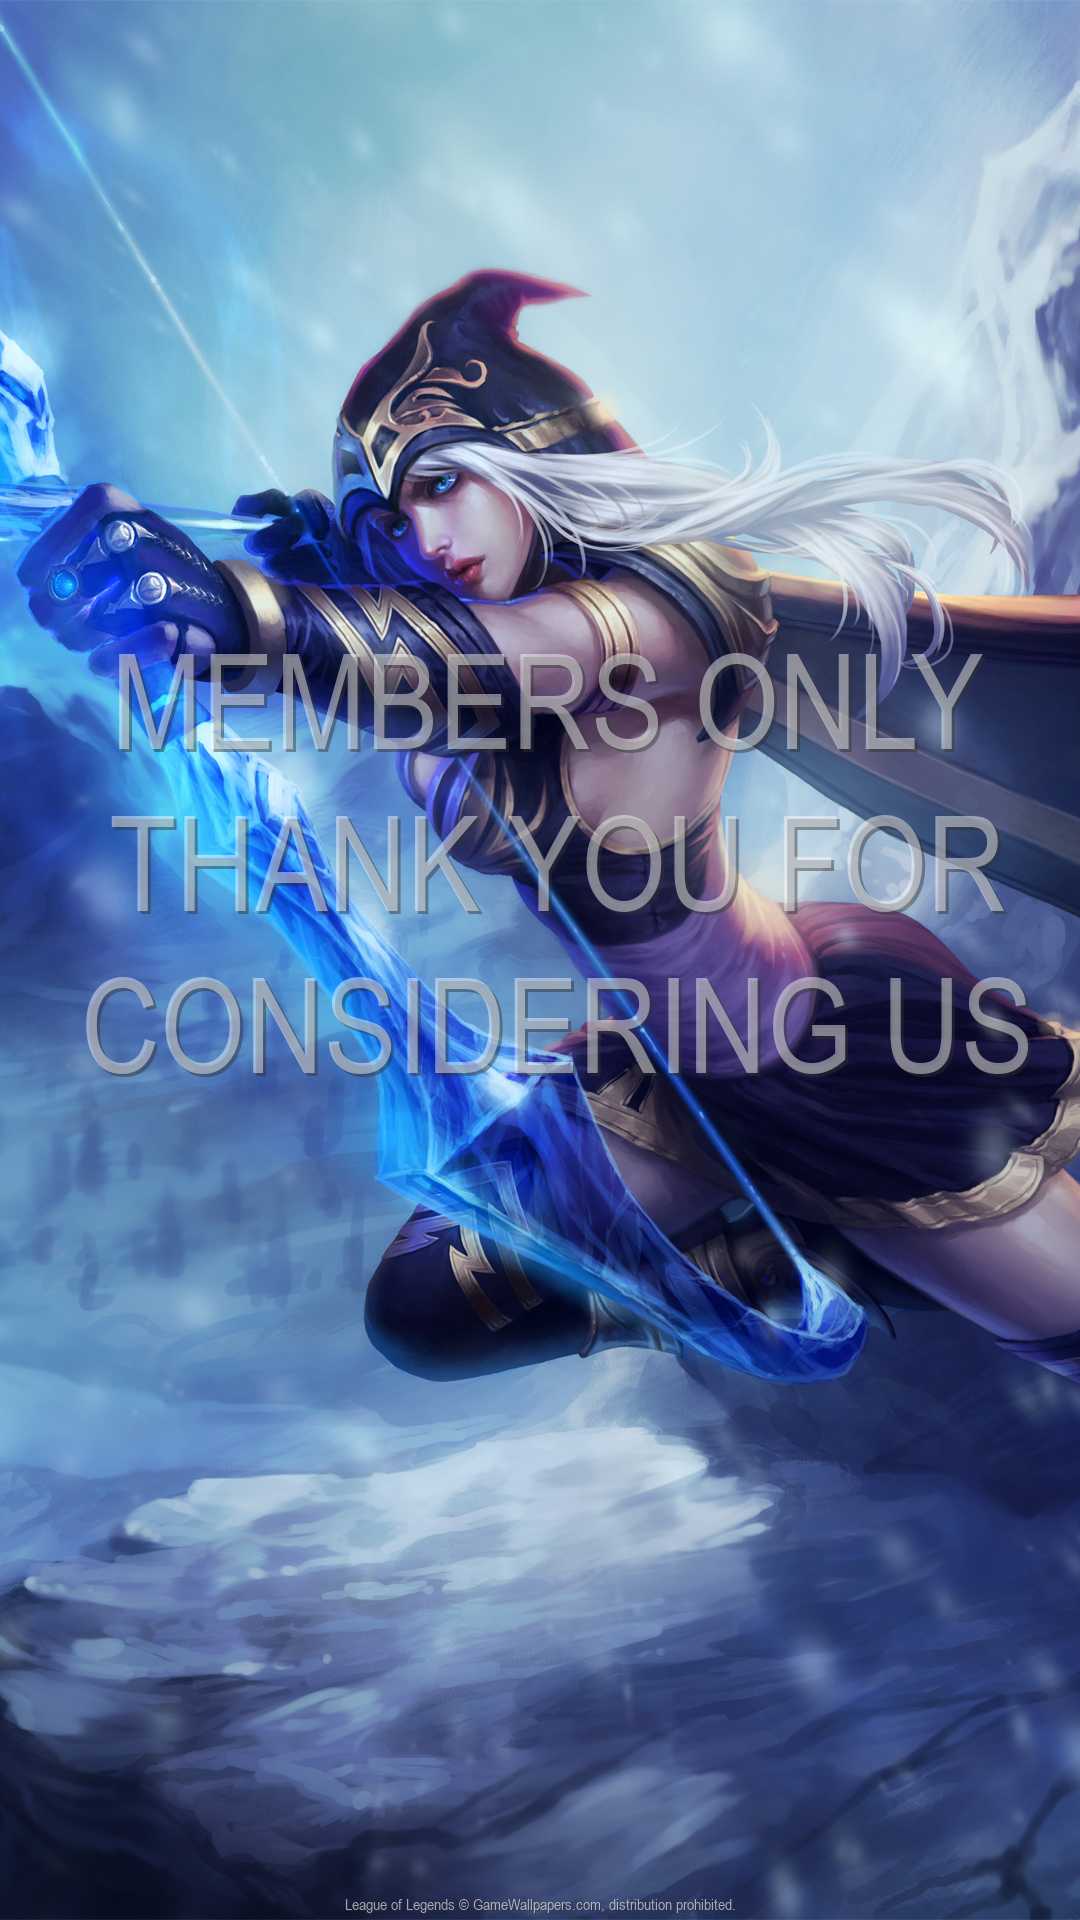 League of Legends 1080p Vertical Mobile wallpaper or background 31